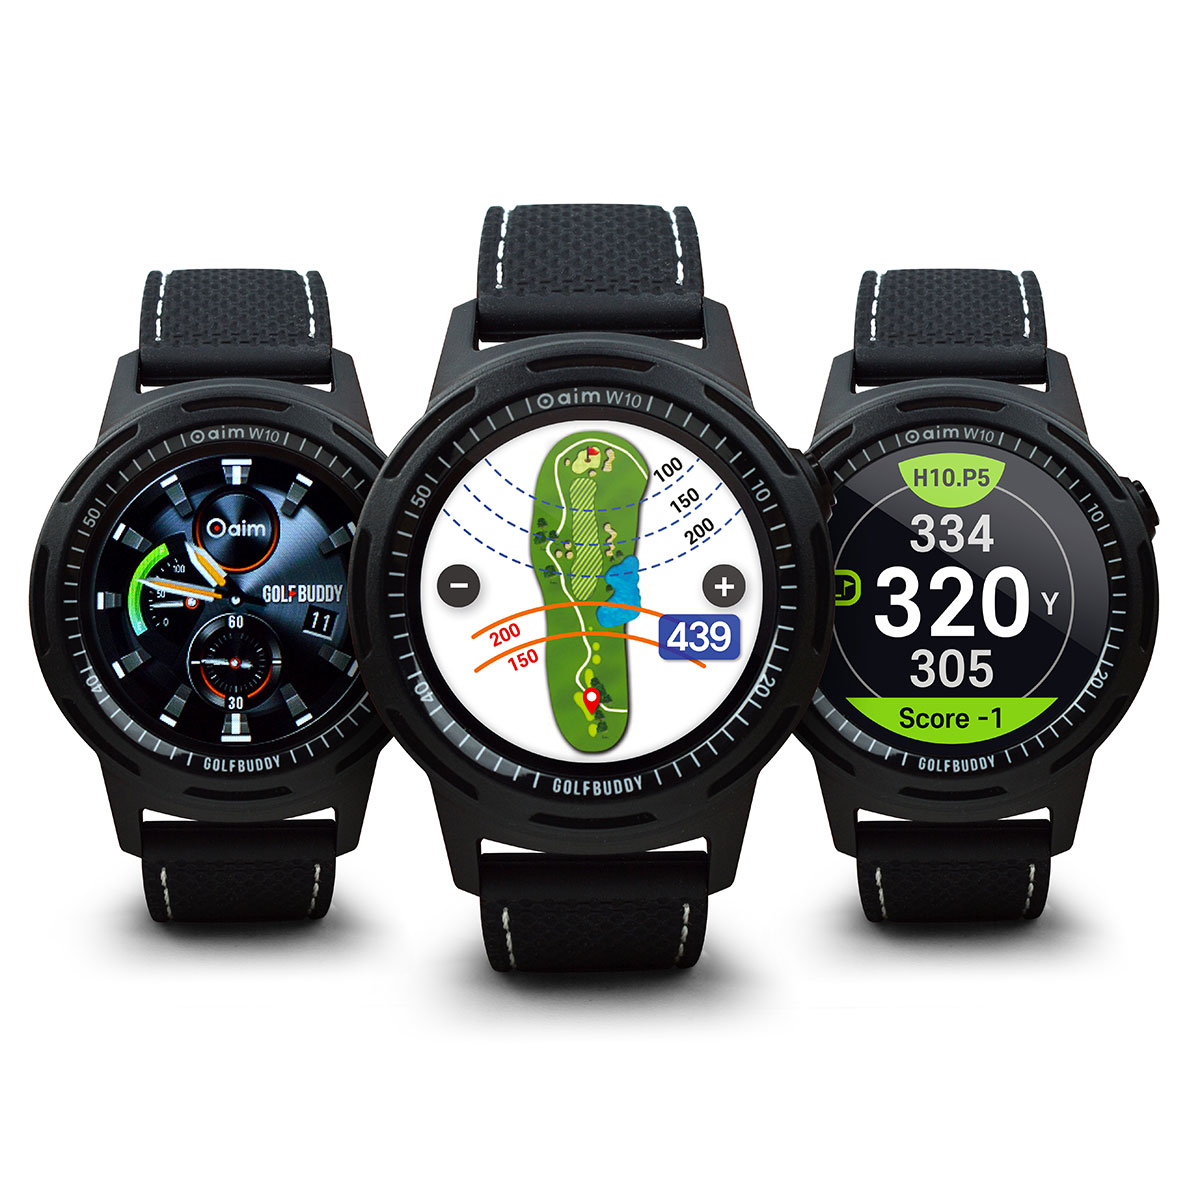 get-the-best-deal-on-golfbuddy-aim-w10-golf-smartwatch-for-149-99